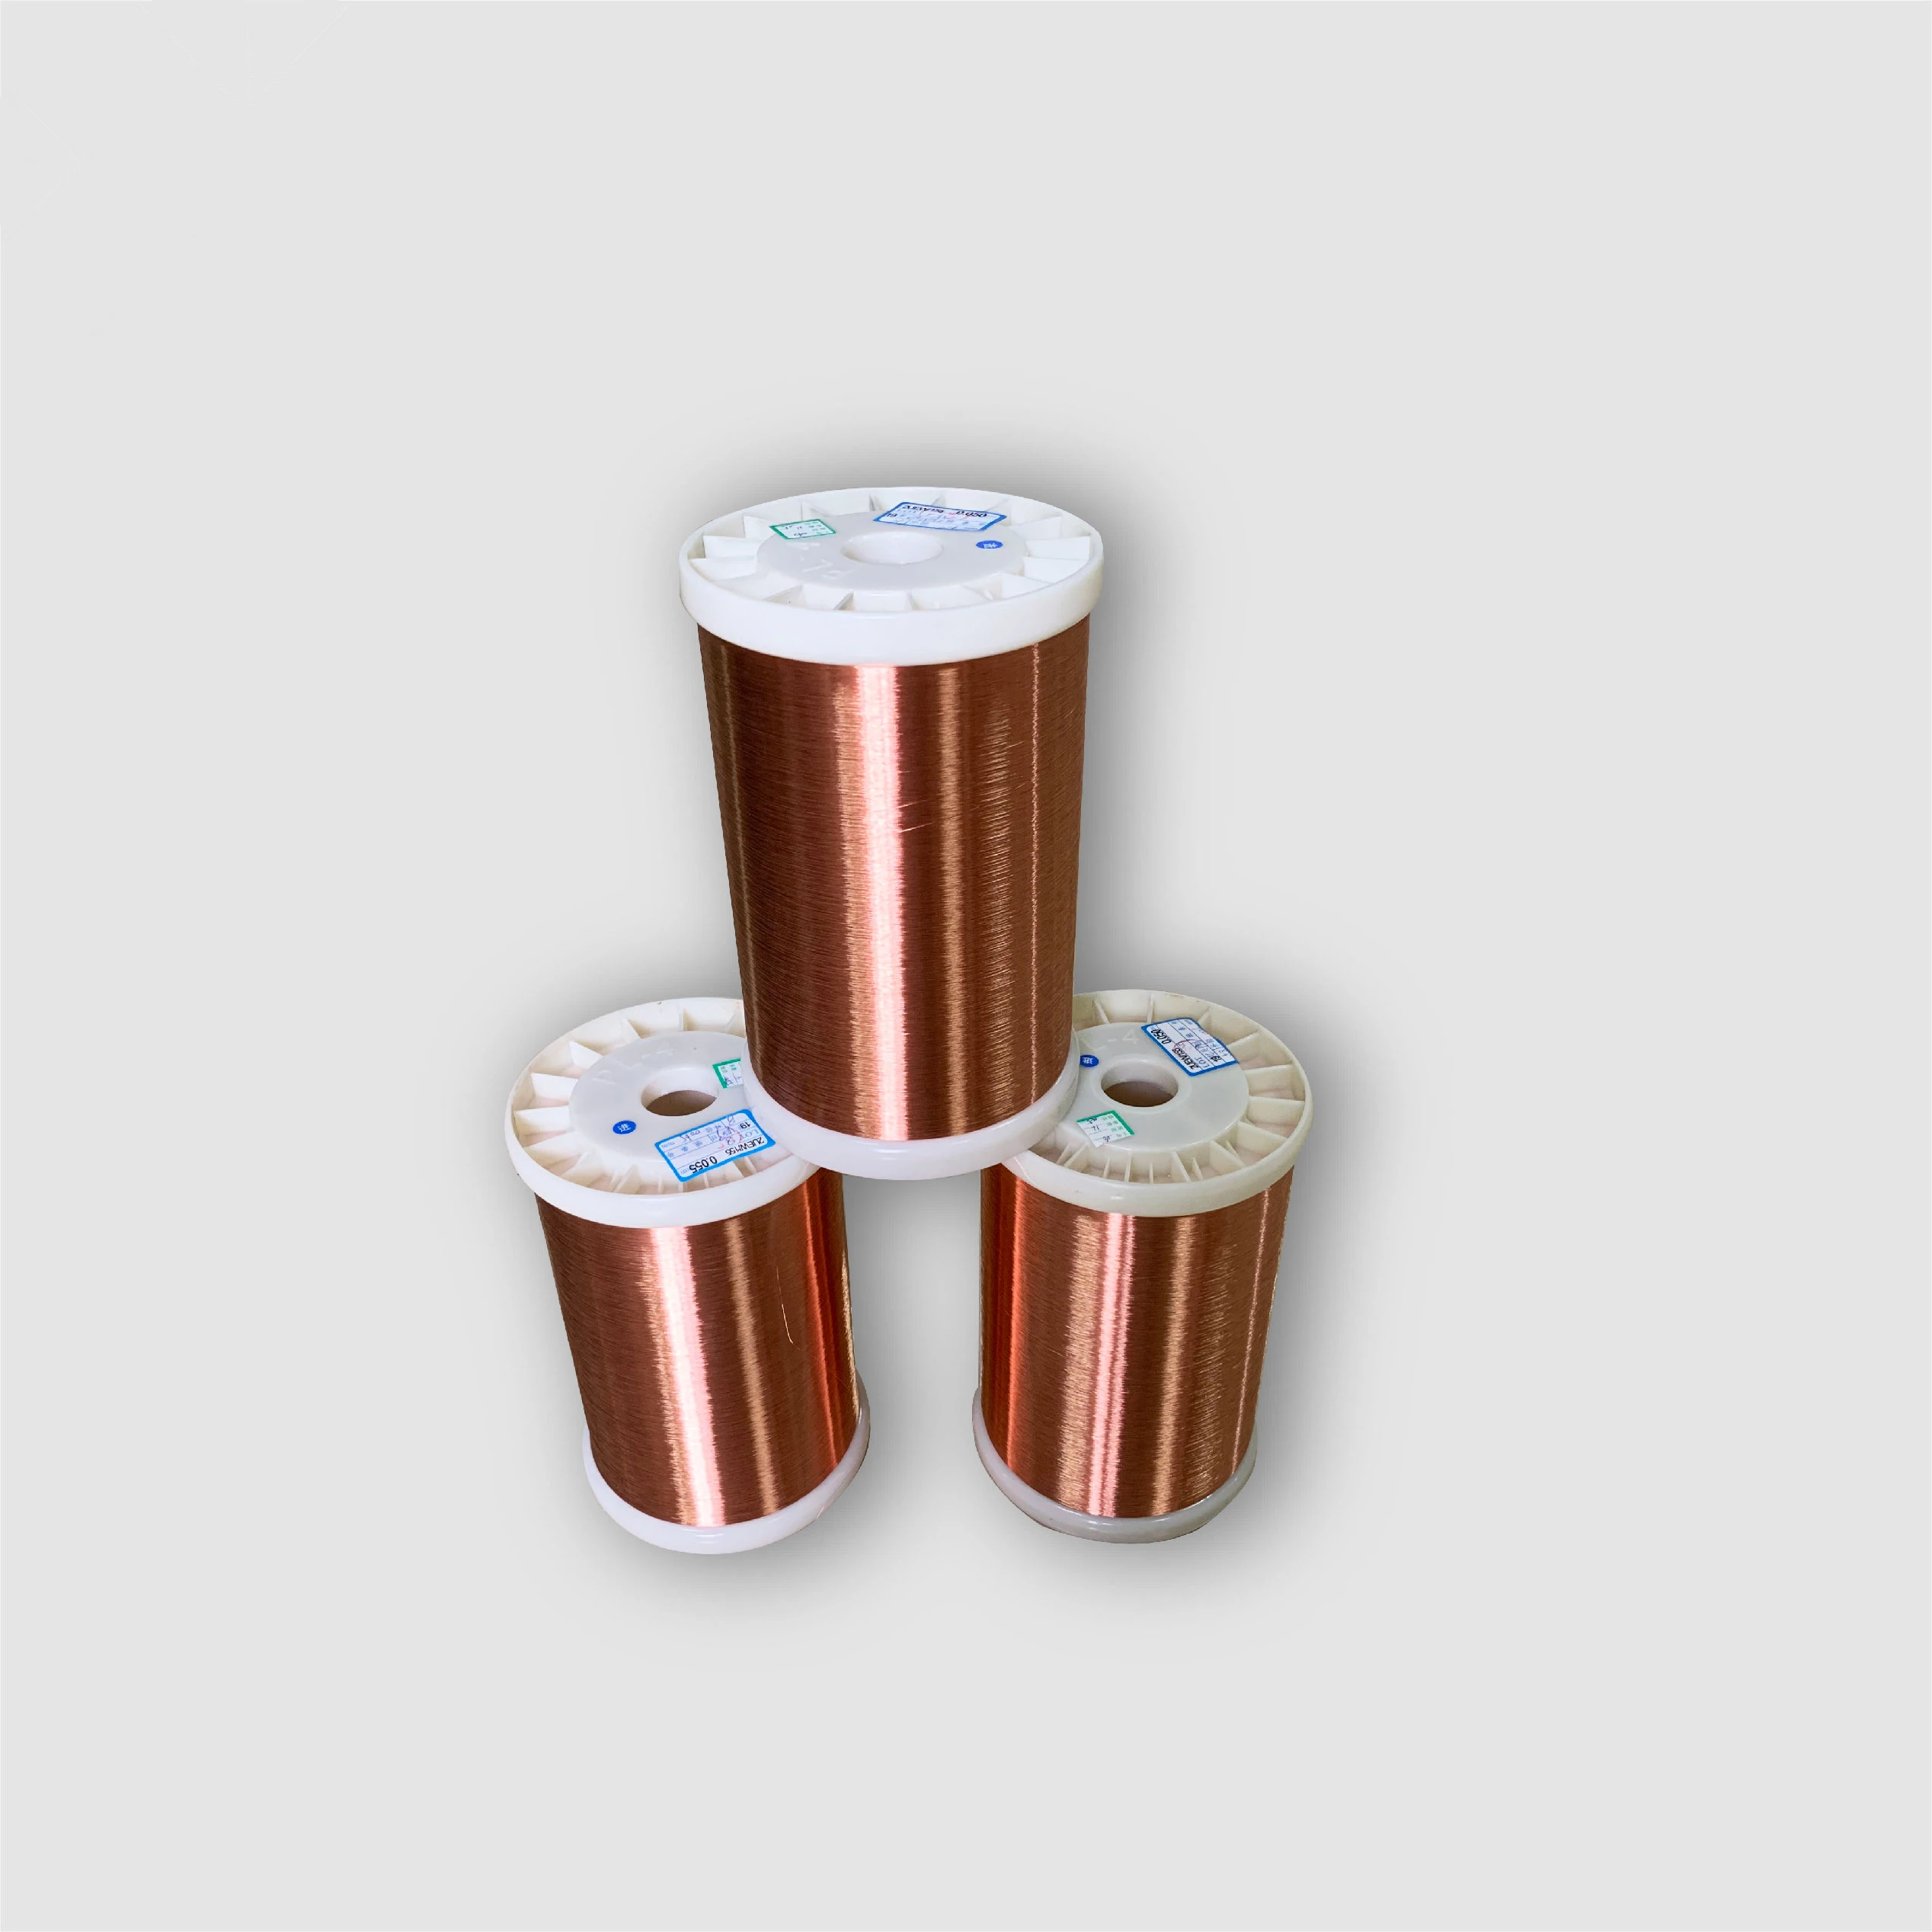 enamelled copper magnet wire with low price